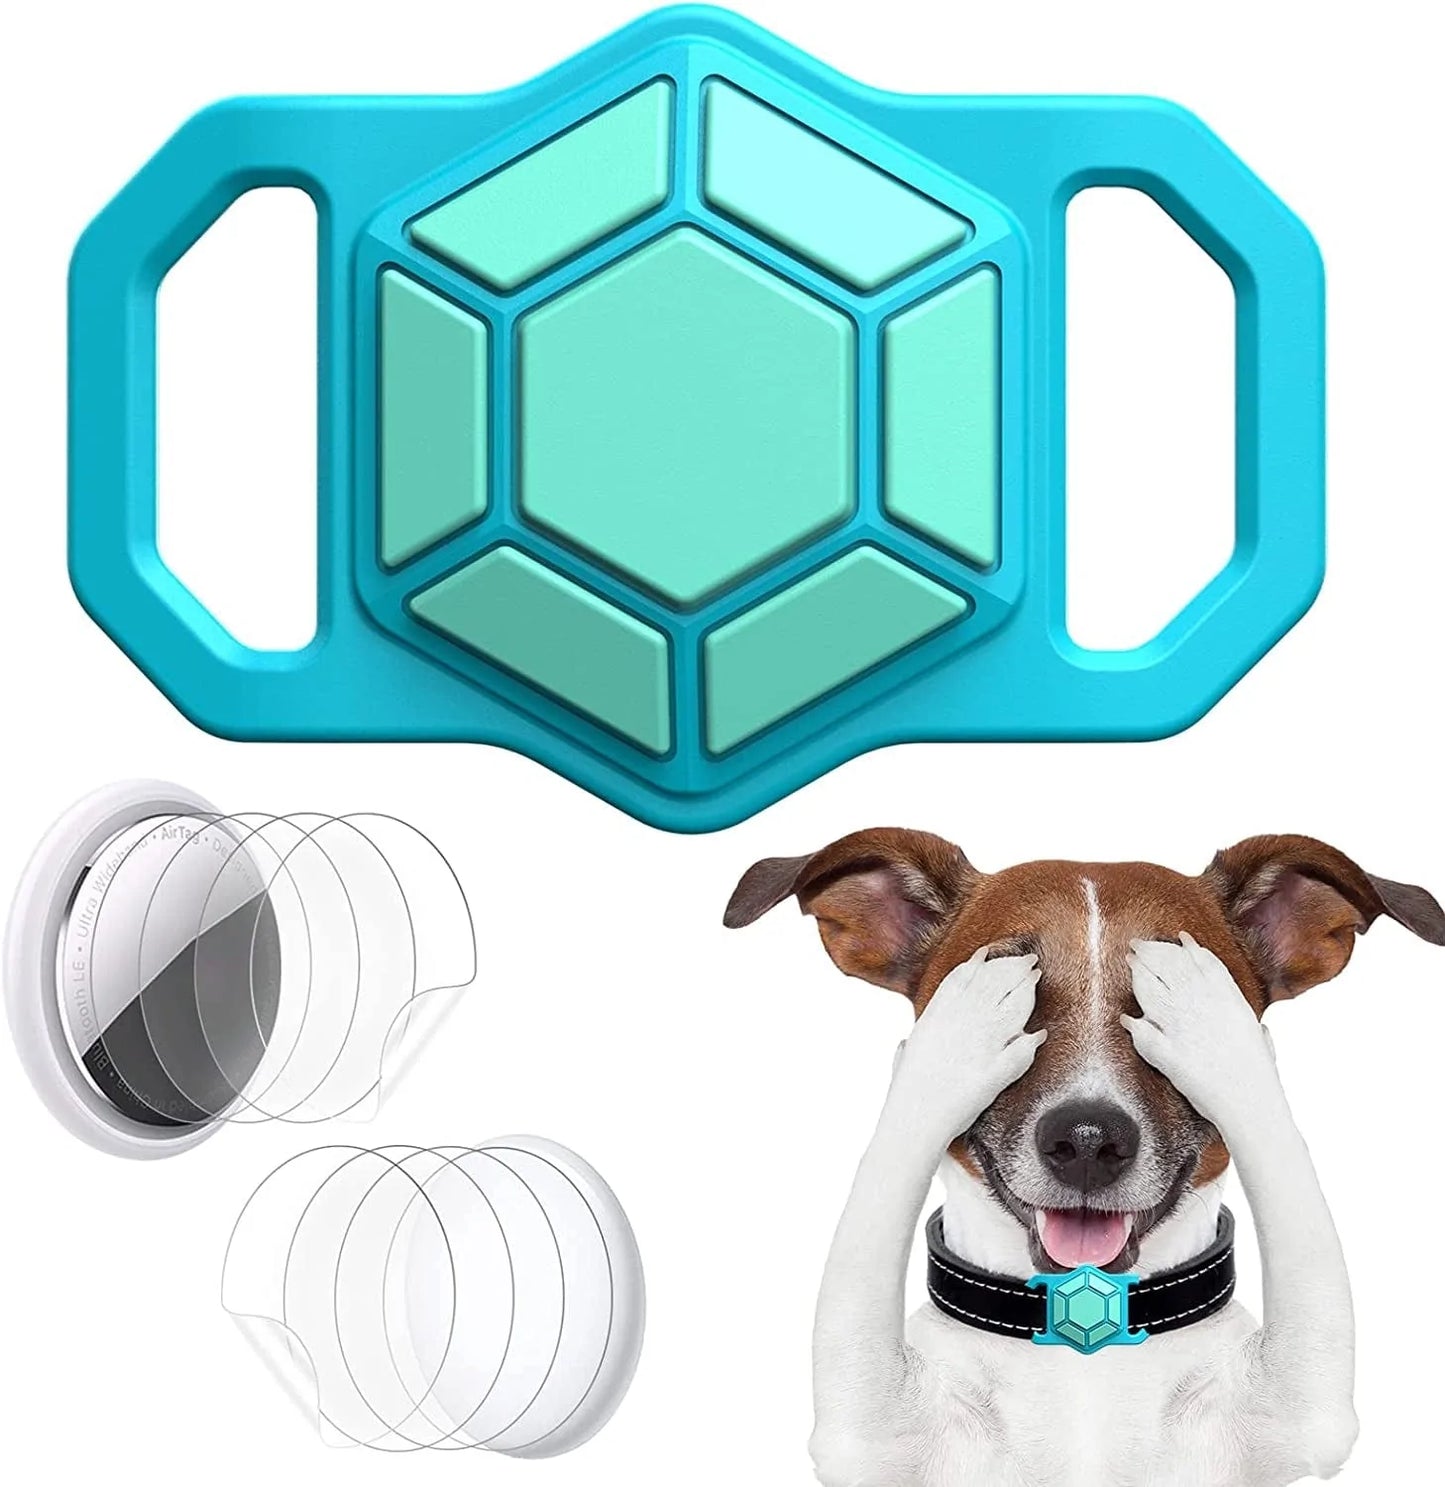 Protective Case Compatible for Apple Airtags for Dog Cat Collar Pet Loop Holder, Airtag Holder Accessories with Screen Protectors, Air Tag Silicone Cover for Pet Collar Electronics > GPS Accessories > GPS Cases Wustentre Fluorescent Blue  